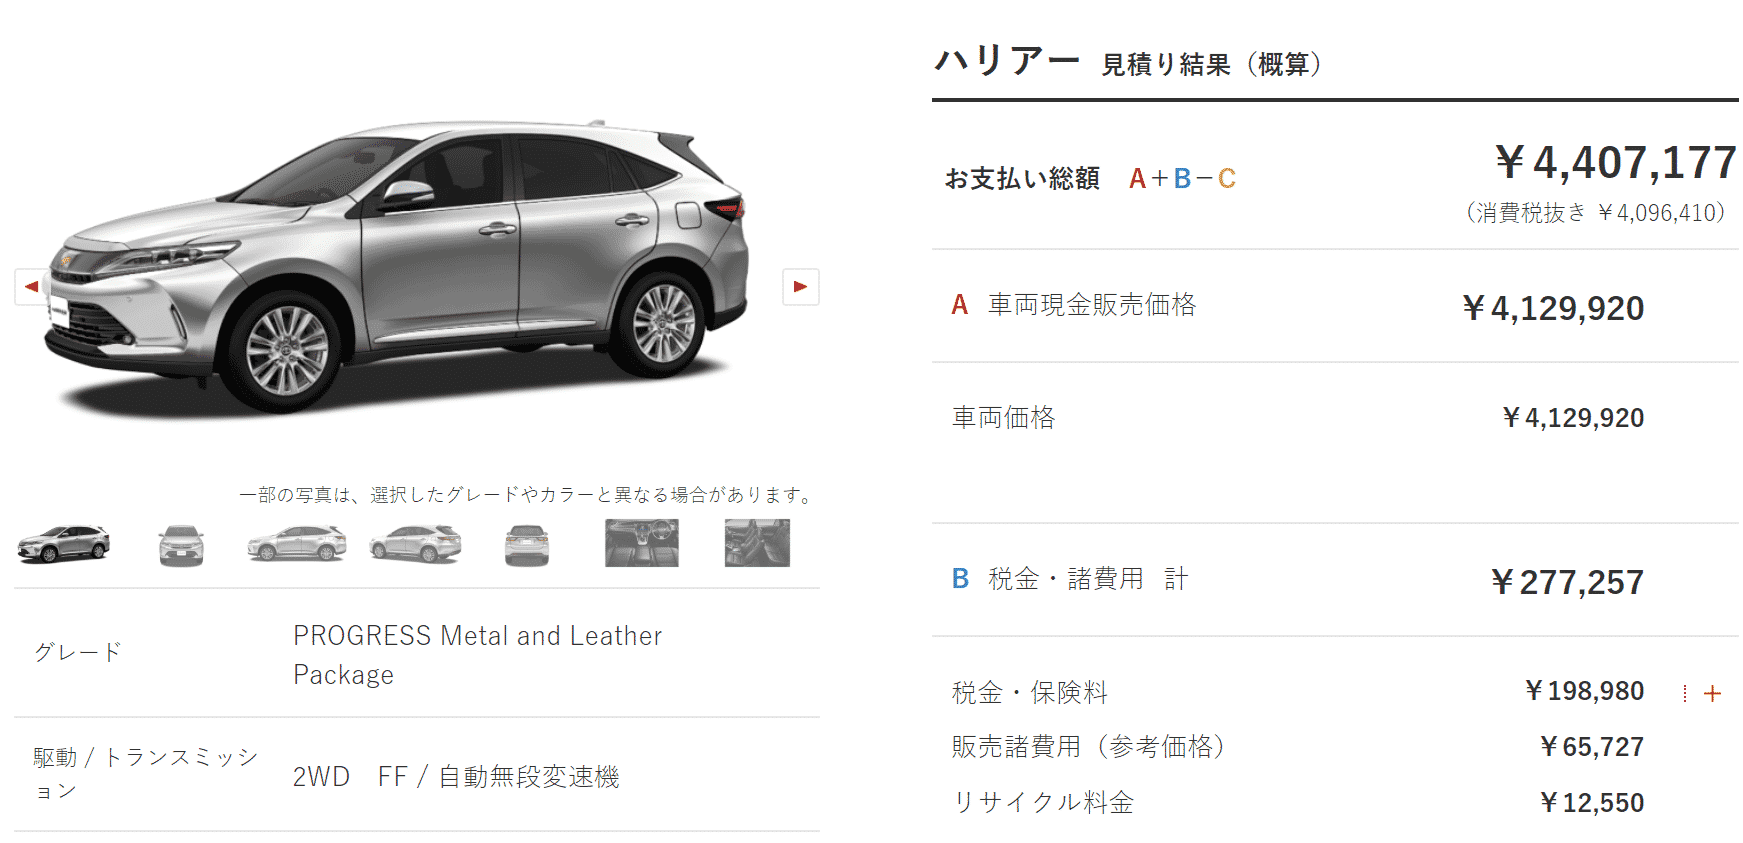 「PROGRESS “Metal and Leather Package”」ガソリン車の支払い総額目処の画像